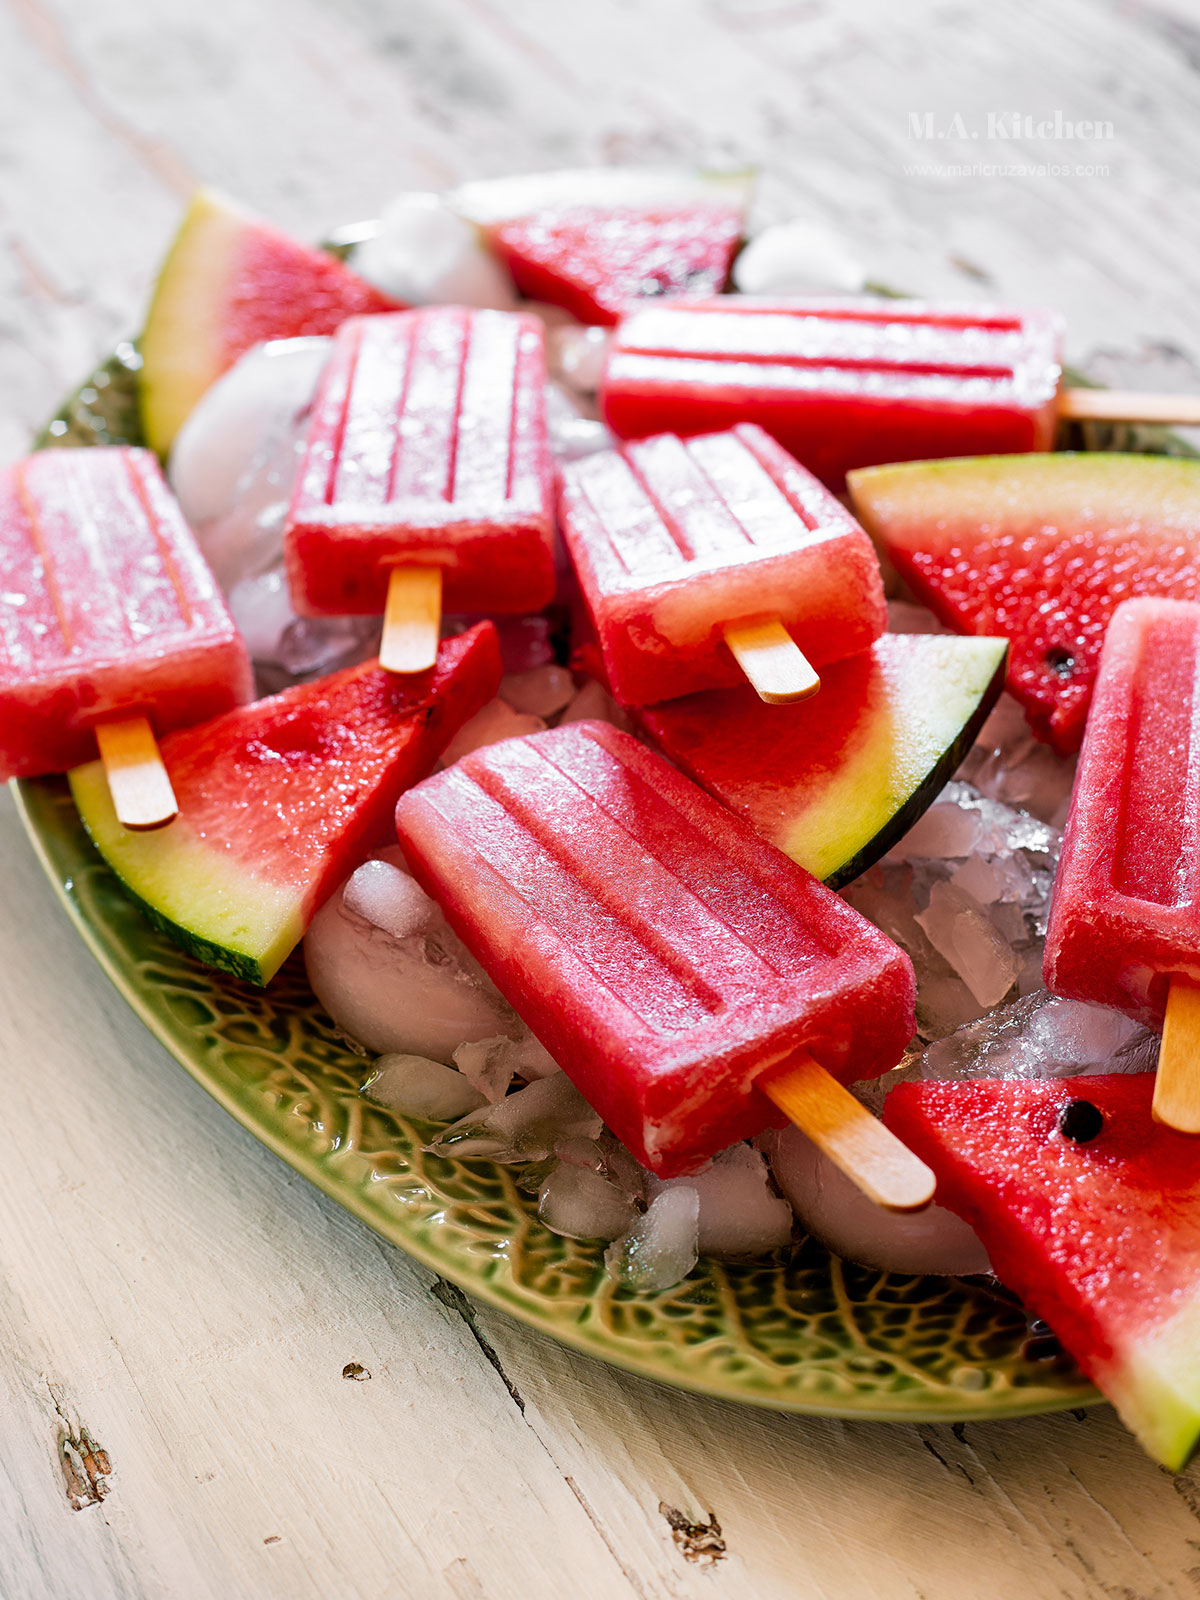 Mexican paletas de sandía, aka watermelon paletas in a plate with crushed ice.